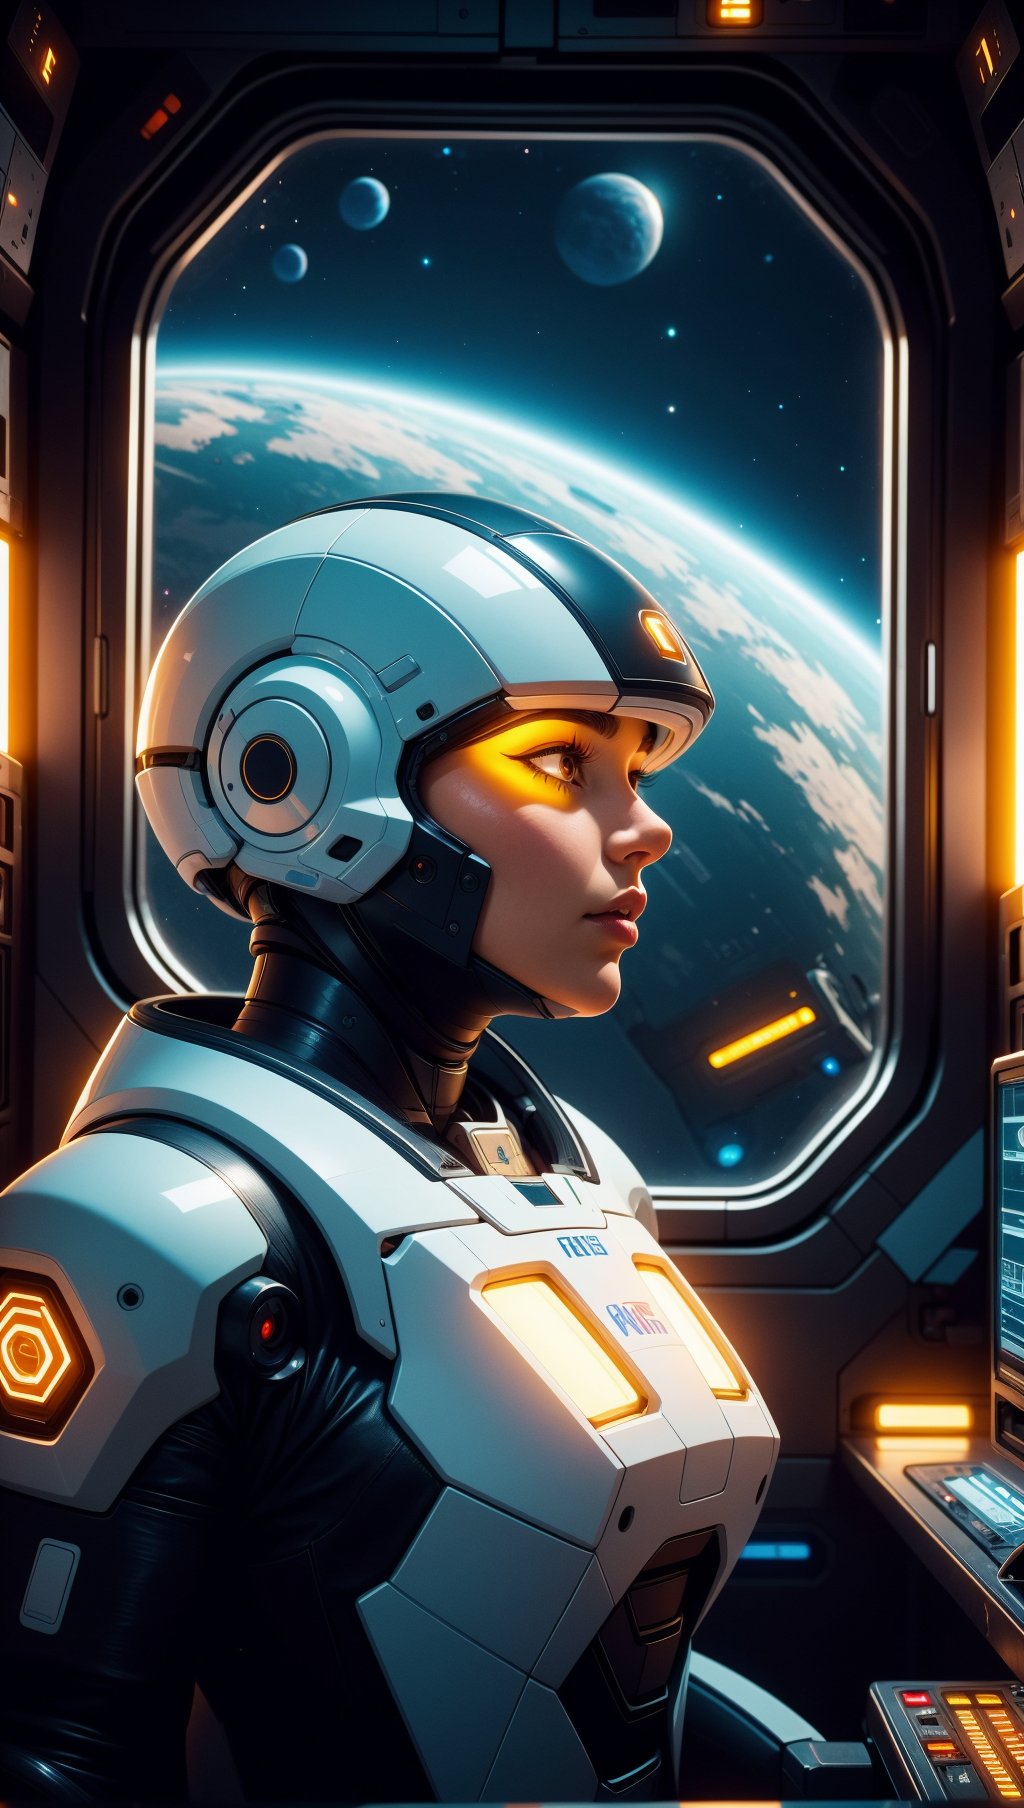 closeup photo of a beautiful android super soldier,deadly military cyborg, futuristic black armor, short white hair, looking out window, cyberpunk, space station nighttime setting,Futuristic room